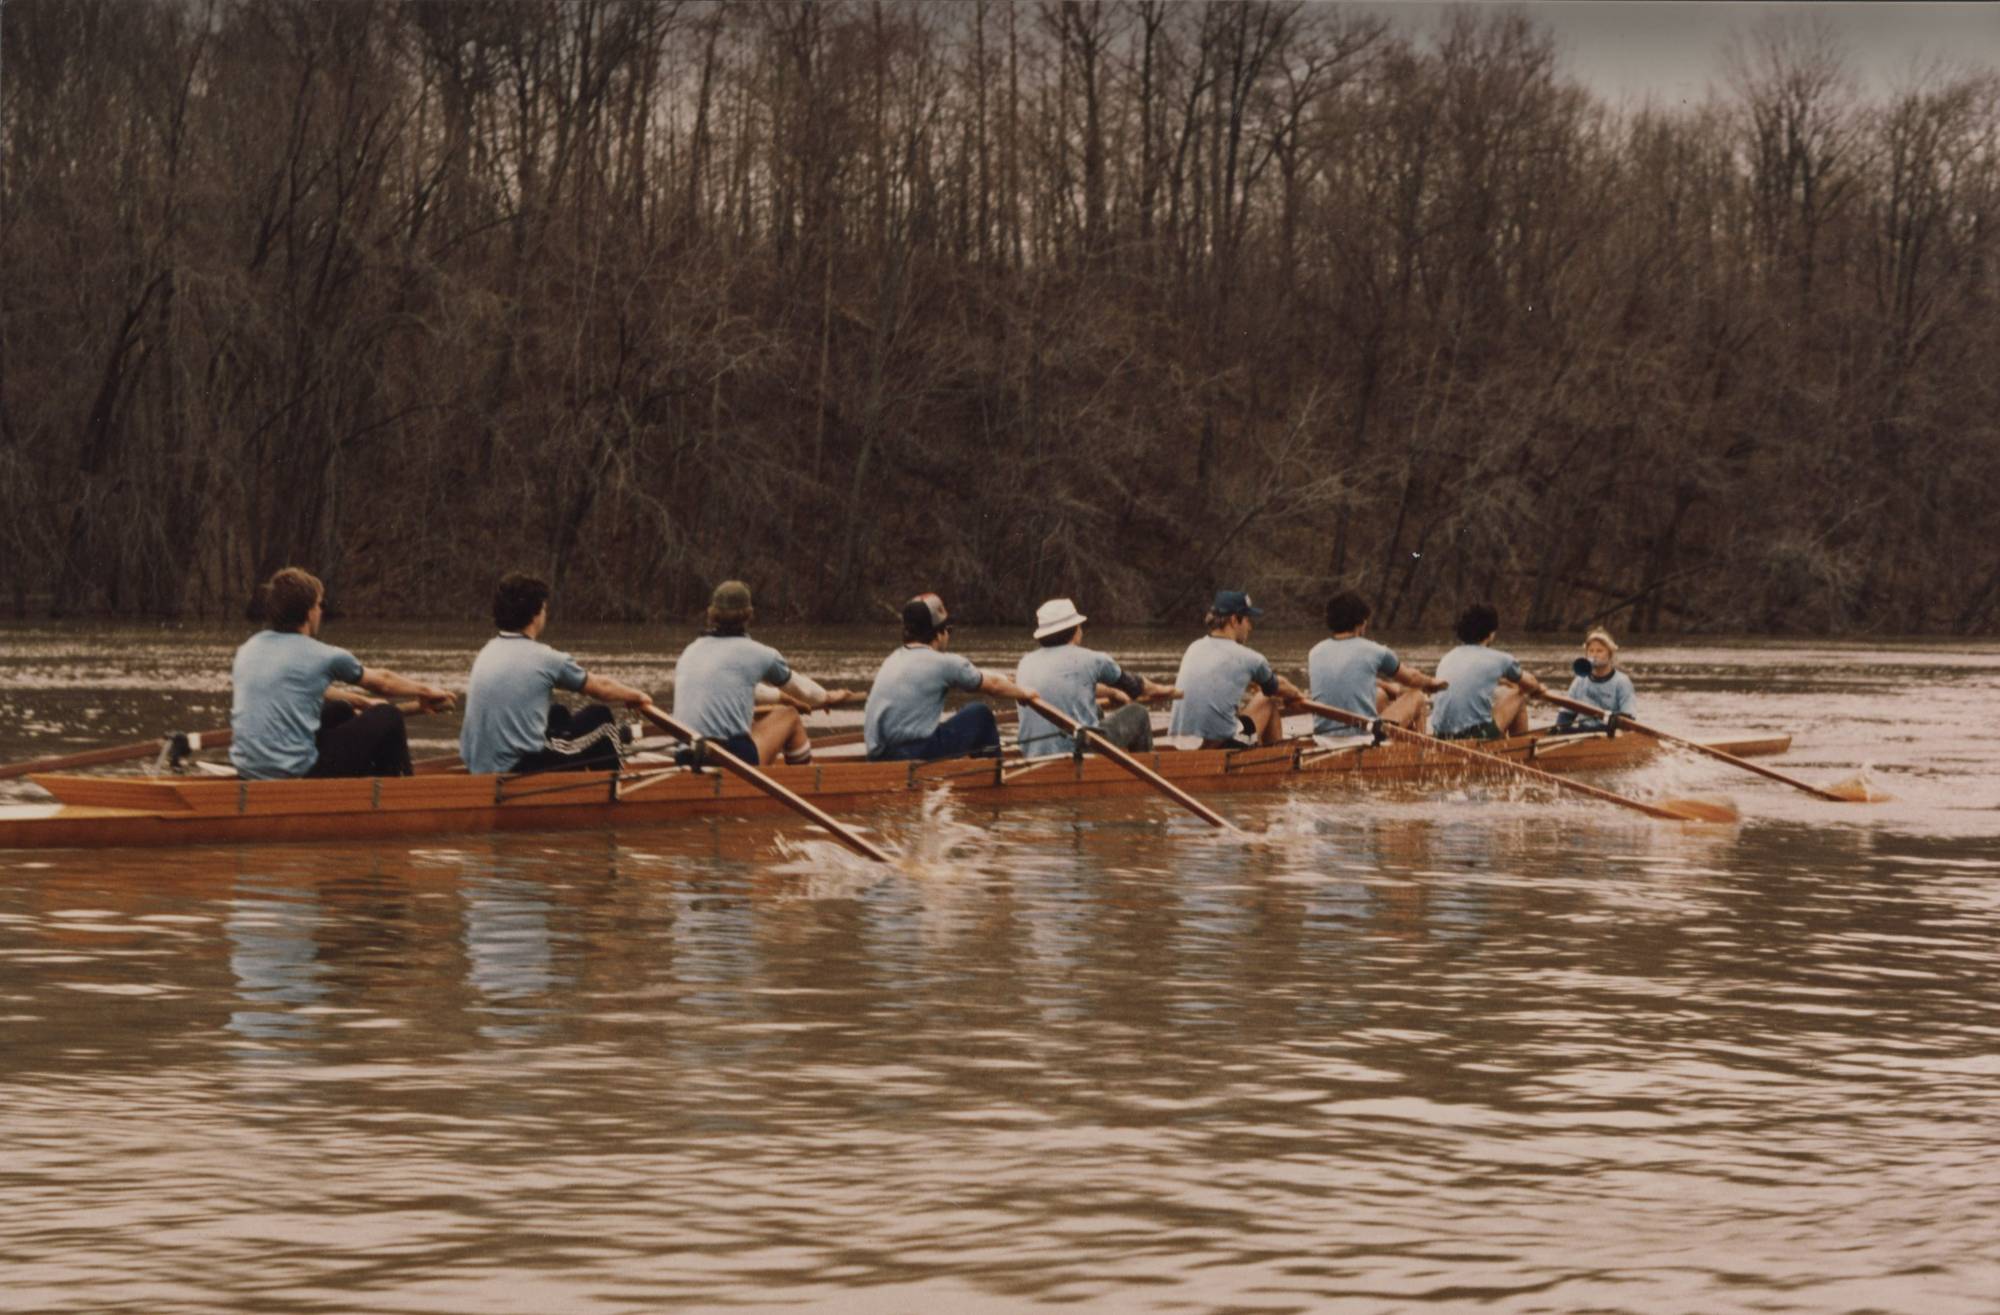 The GVSU rowing team trains on the Grand River in the late 1960s or early 1970s